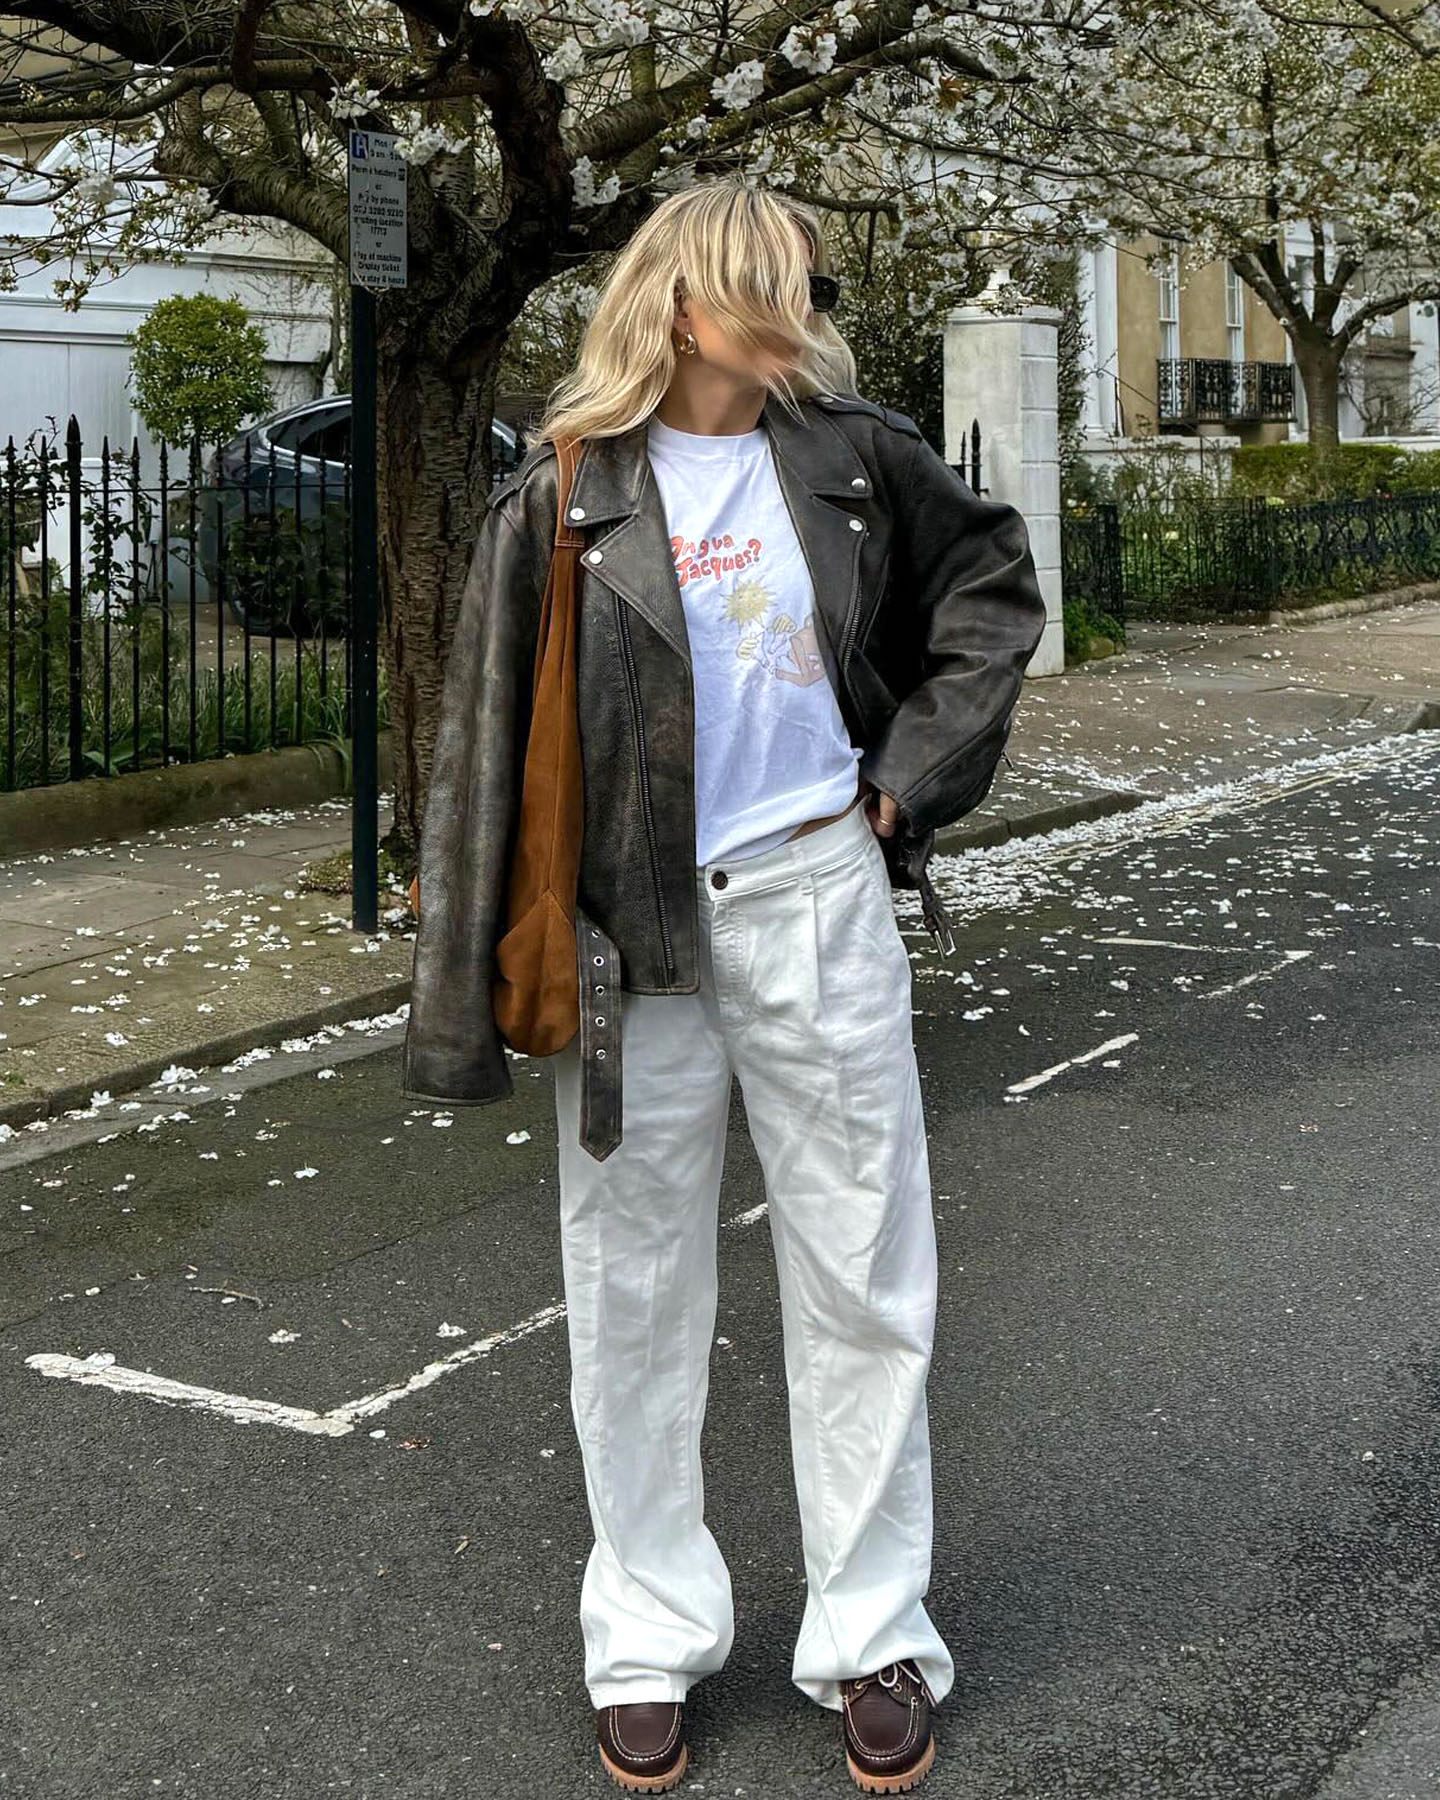 British fashion influencer Lucy Williams wears a stylish outfit with a brown leather moto jacket, a graphic tee, camel suede shoulder bag, neutral baggy pants, and brown boat shoes